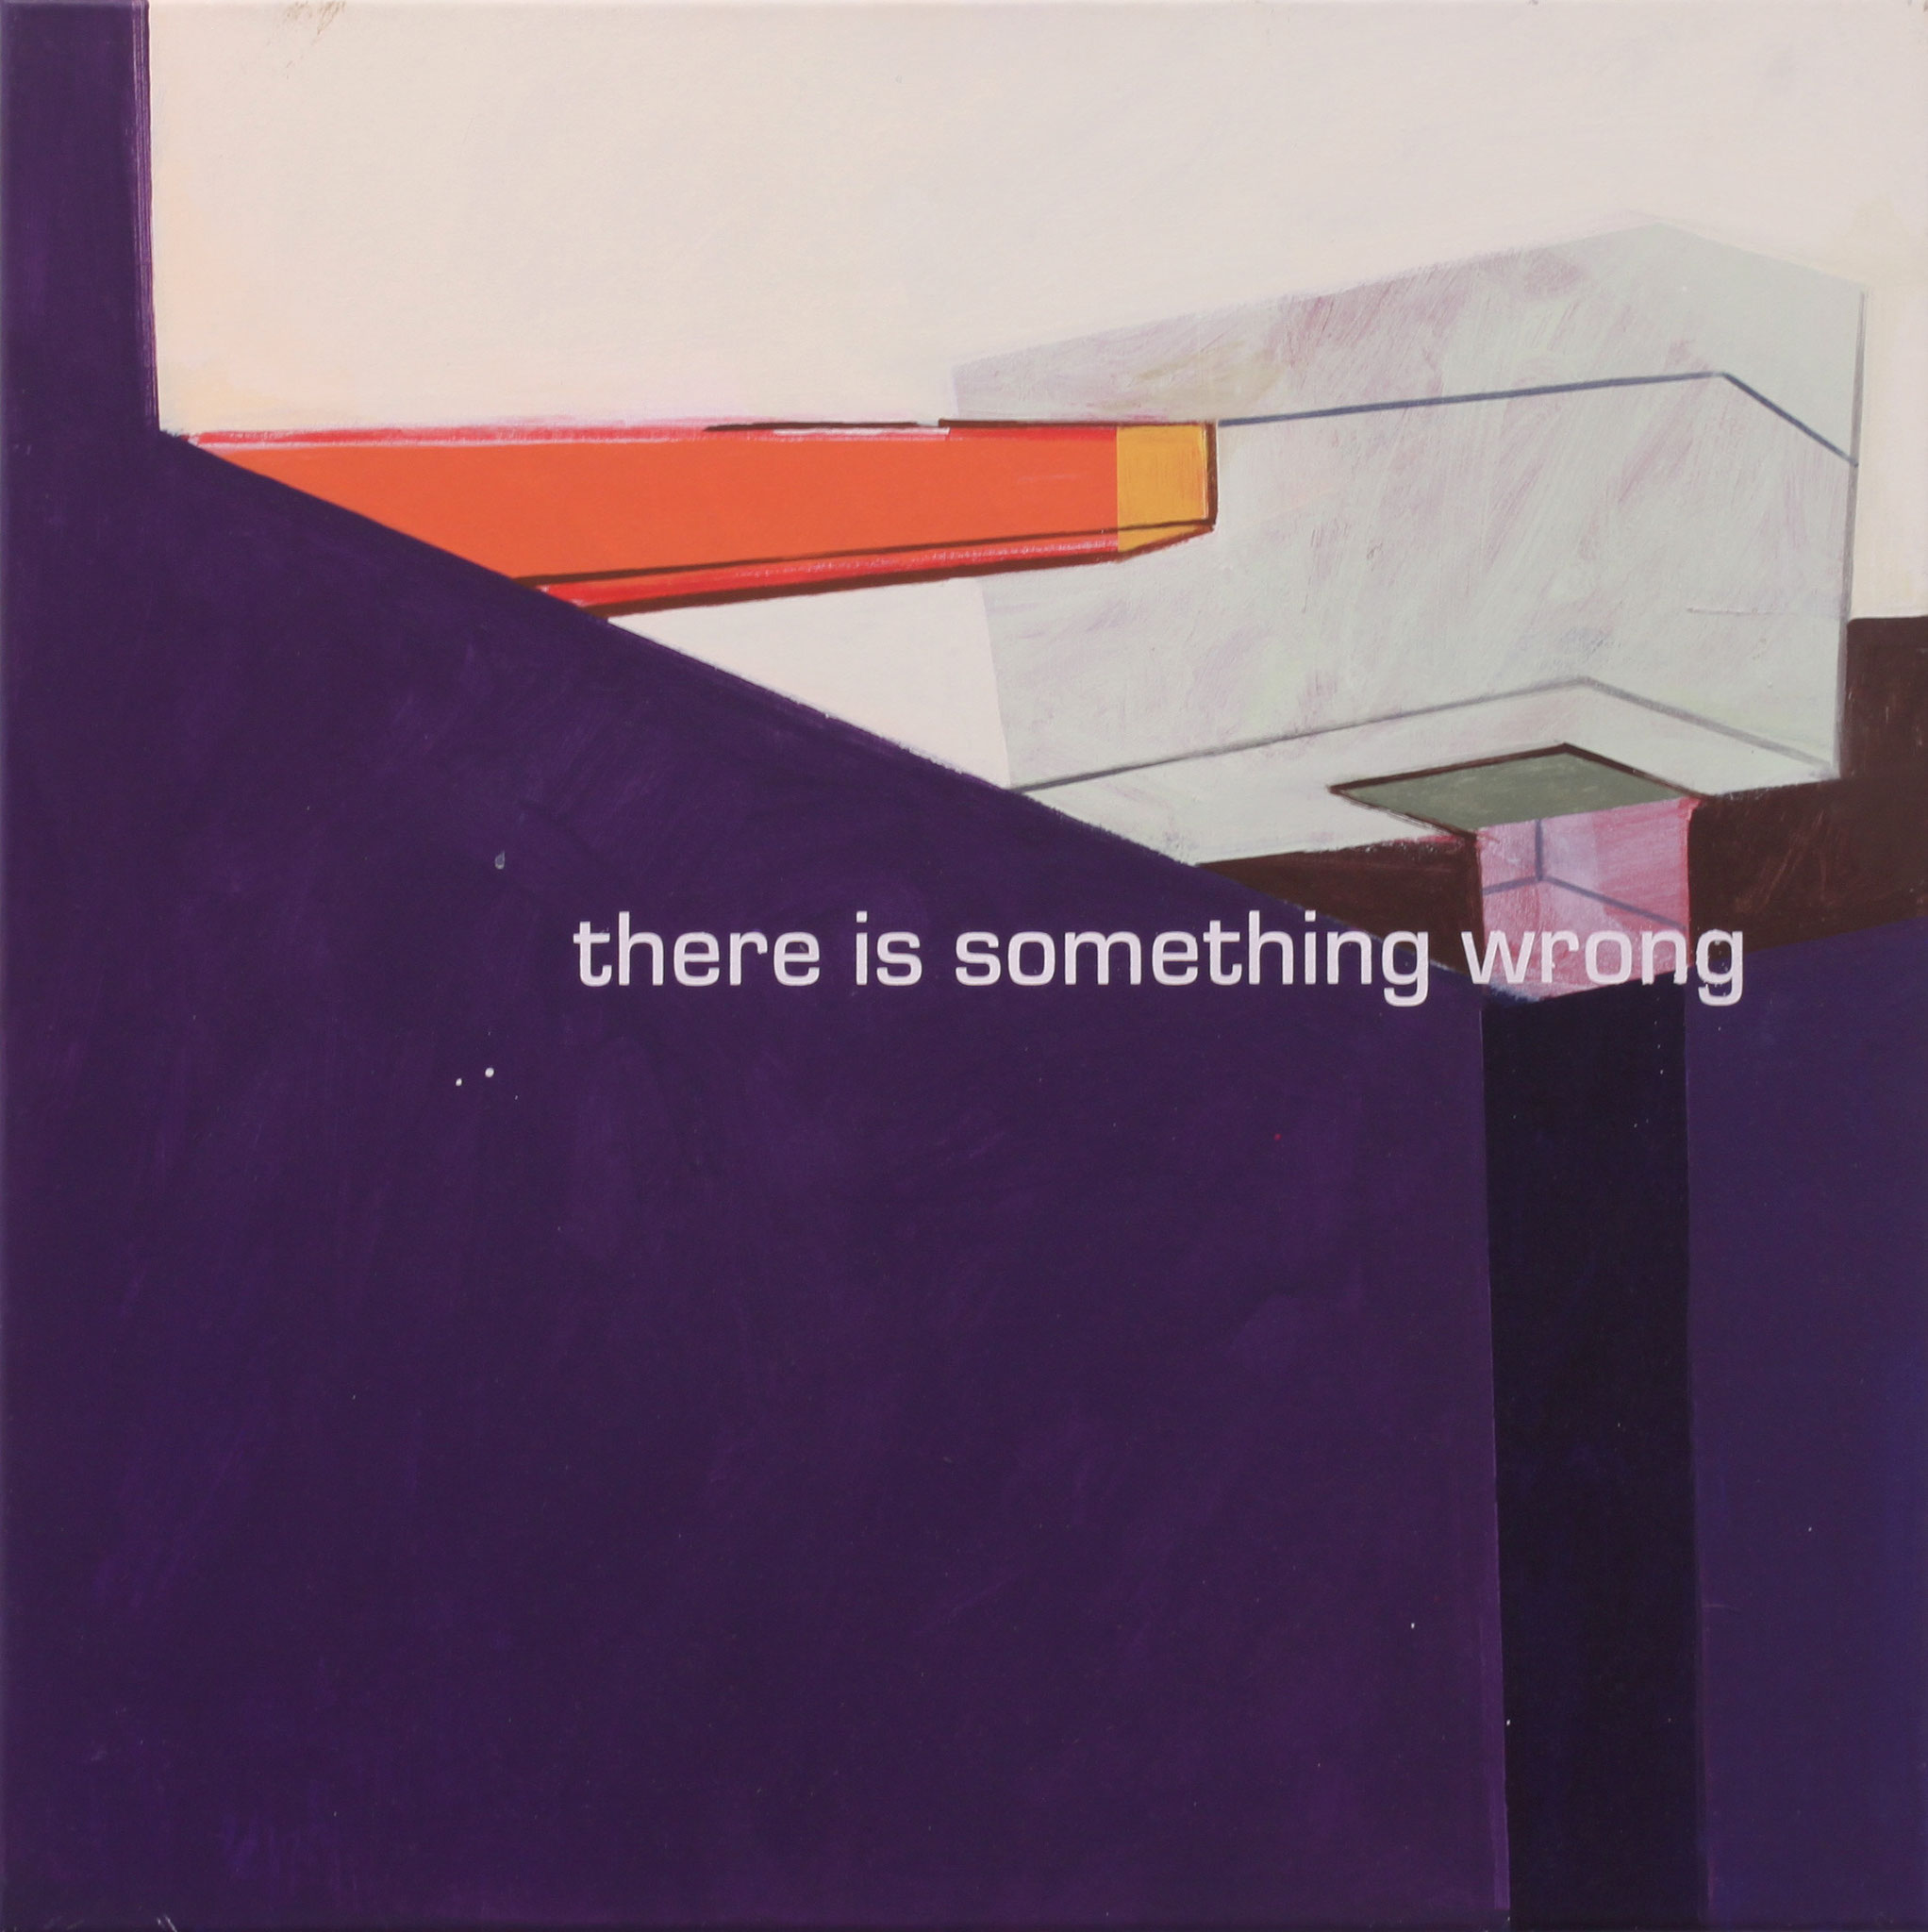 Lucia Dellefant, "there is something wrong", Öl auf Leinwand, 2009